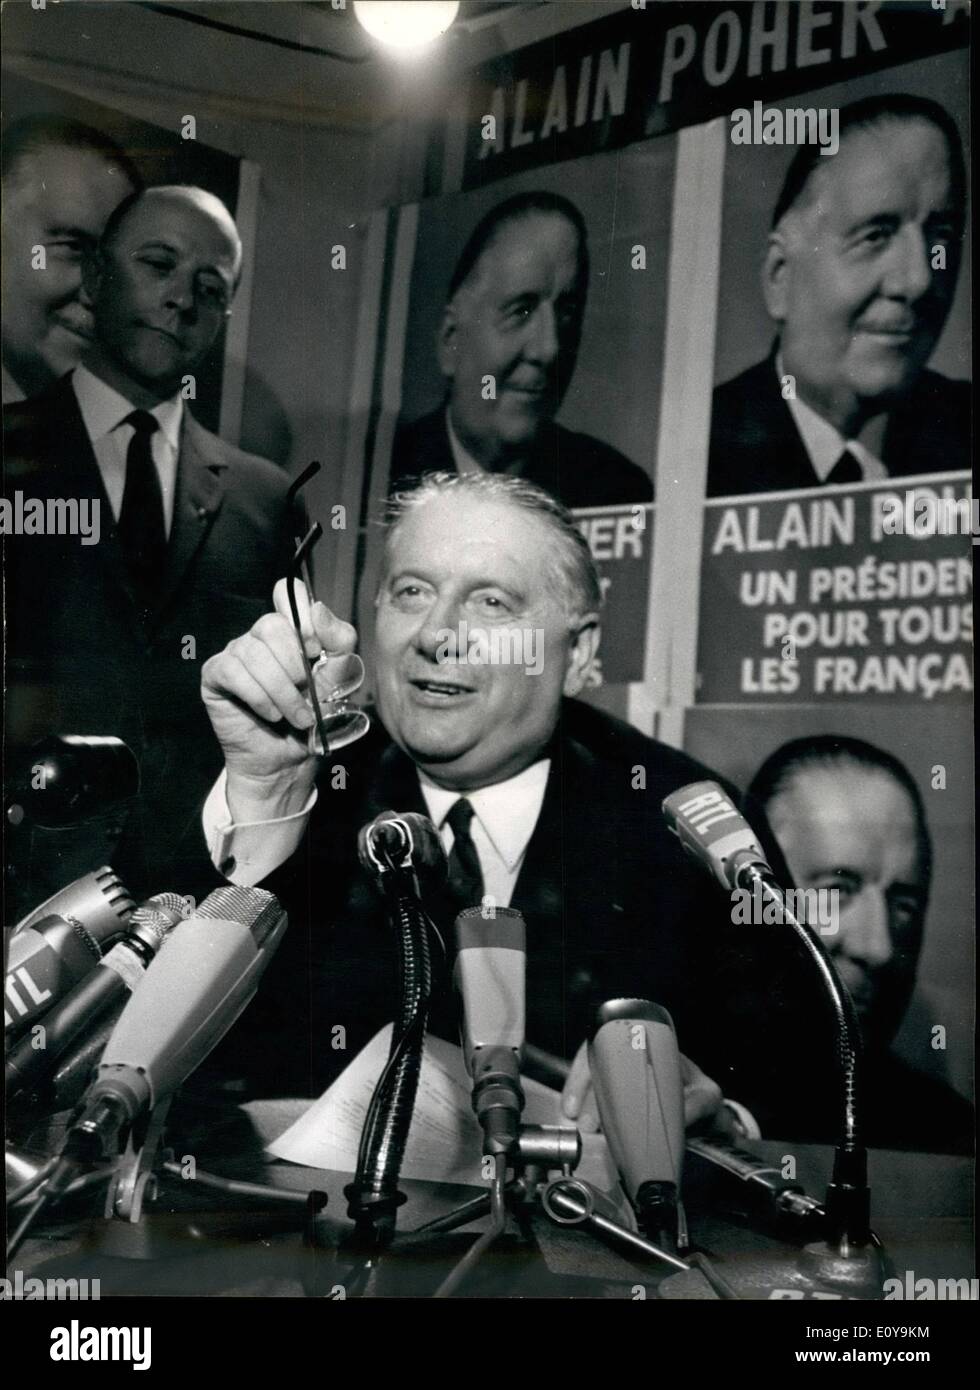 Jun. 06, 1969 - After the first round of scrutiny for the presidential election, Georges Pompidou is ahead of the other candidates. Alain Power and Jacques Duclos are closer however. American Delegate Philip C. Habib Stock Photo